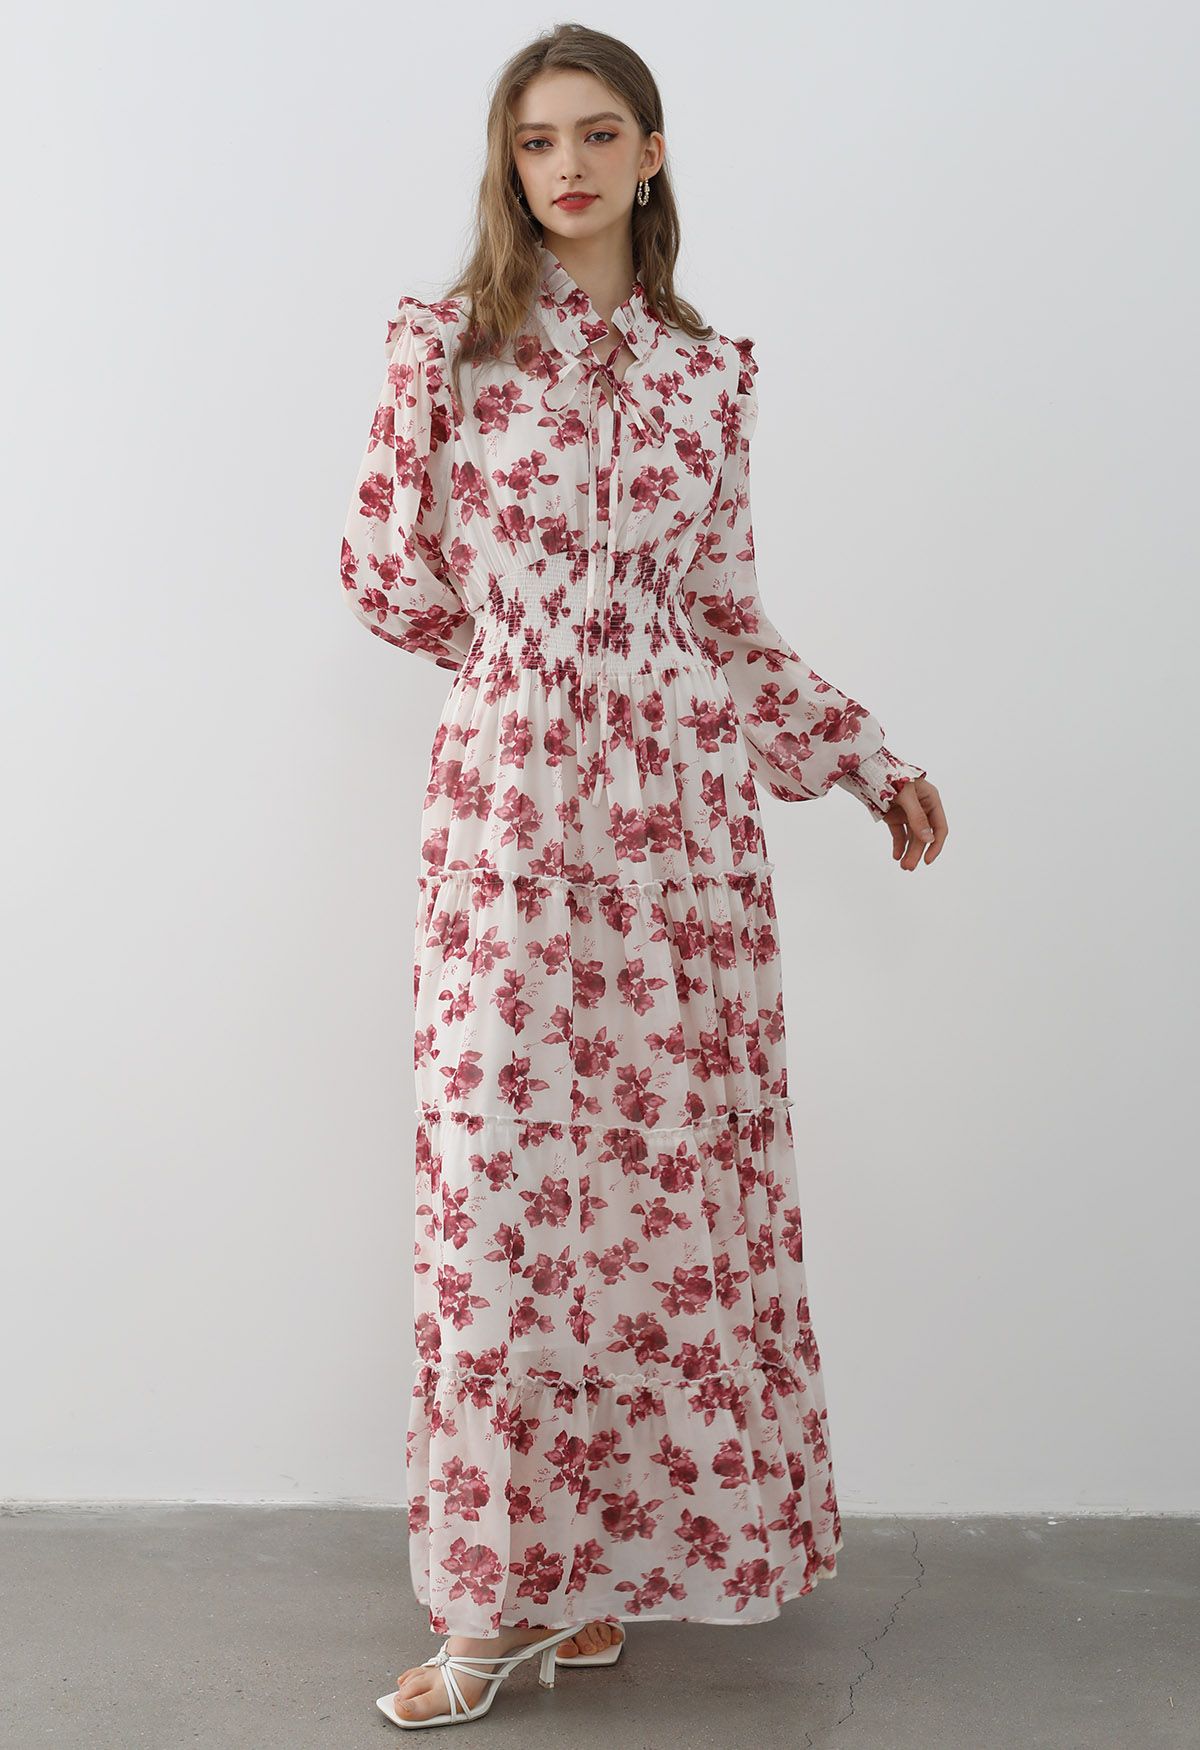 Darling Red Floral Tie Neck Maxi Dress